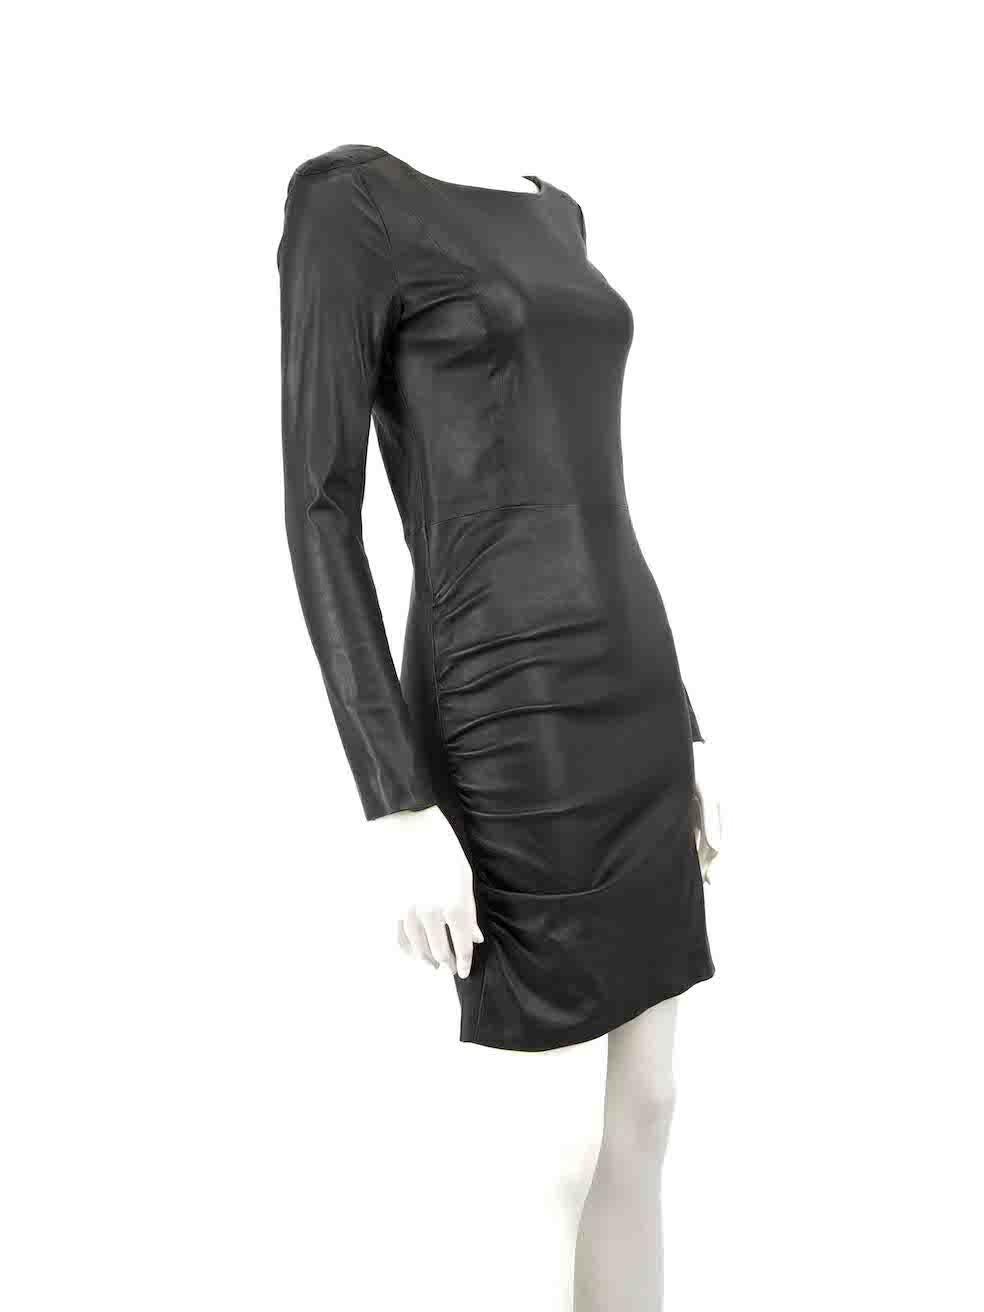 CONDITION is Very good. Minimal wear to dress is evident. Minimal wear to both elbows with light abrasions to the leather on this used Maje designer resale item.
 
 
 
 Details
 
 
 Black
 
 Leather
 
 Dress
 
 Long sleeves
 
 Round neck
 
 Back zip